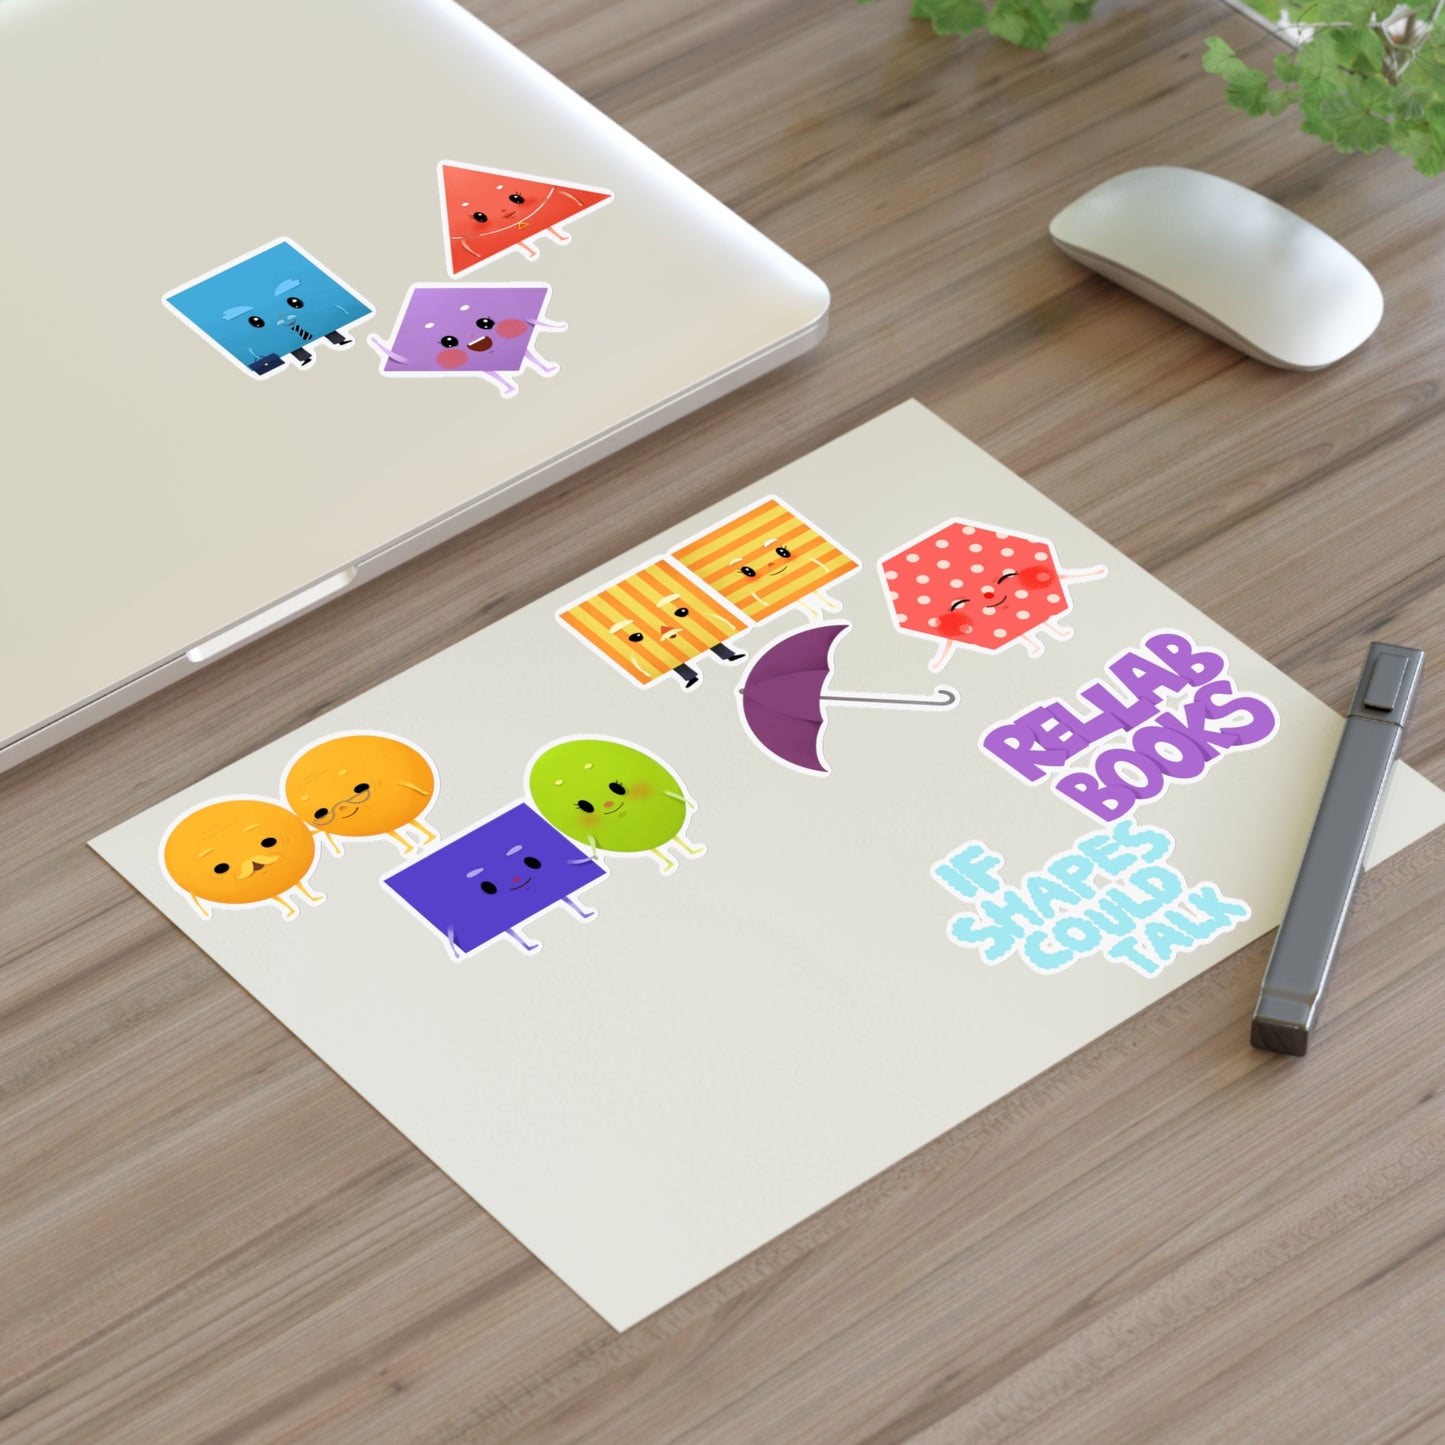 If Shapes Could Talk Stickers